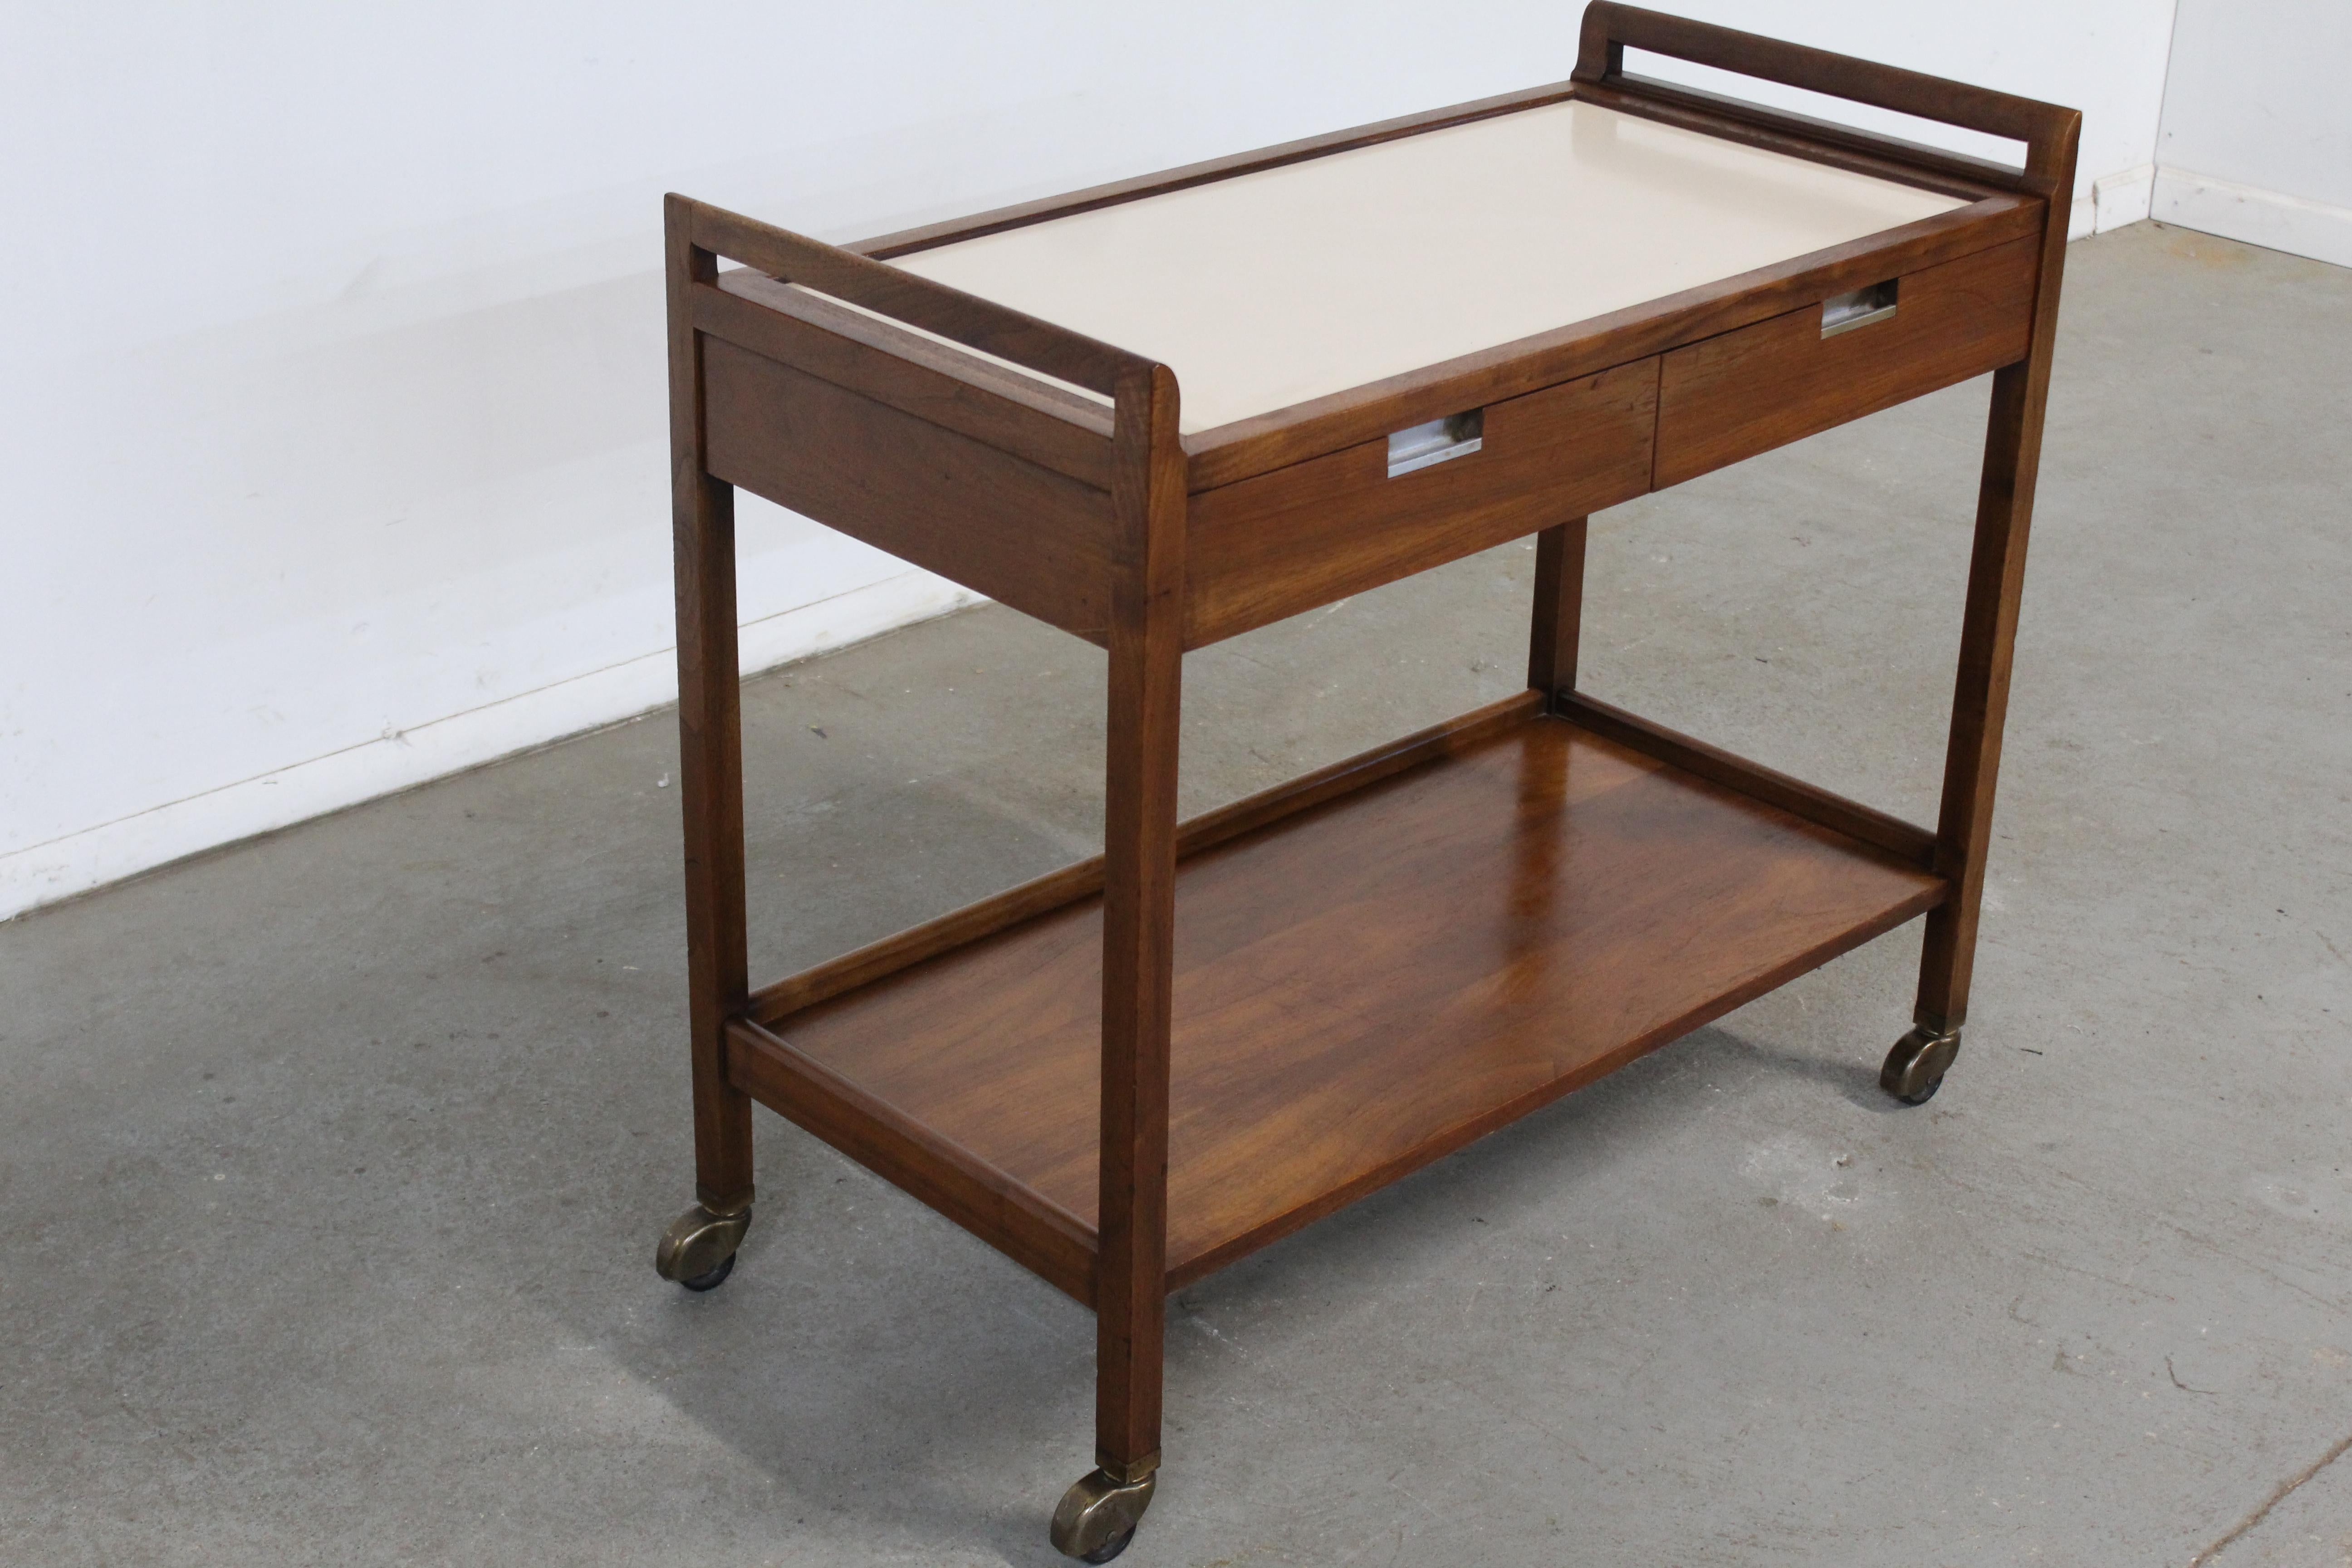 Vintage Mid-Century Modern walnut bar cart by Merton Gershun on Wheels.
 Offered is a very cool Modern Walnut bar cart. Features two drawer, spill proof top and large bottom shelf. It is also on wheels. Designed by Merton Gershun for American of